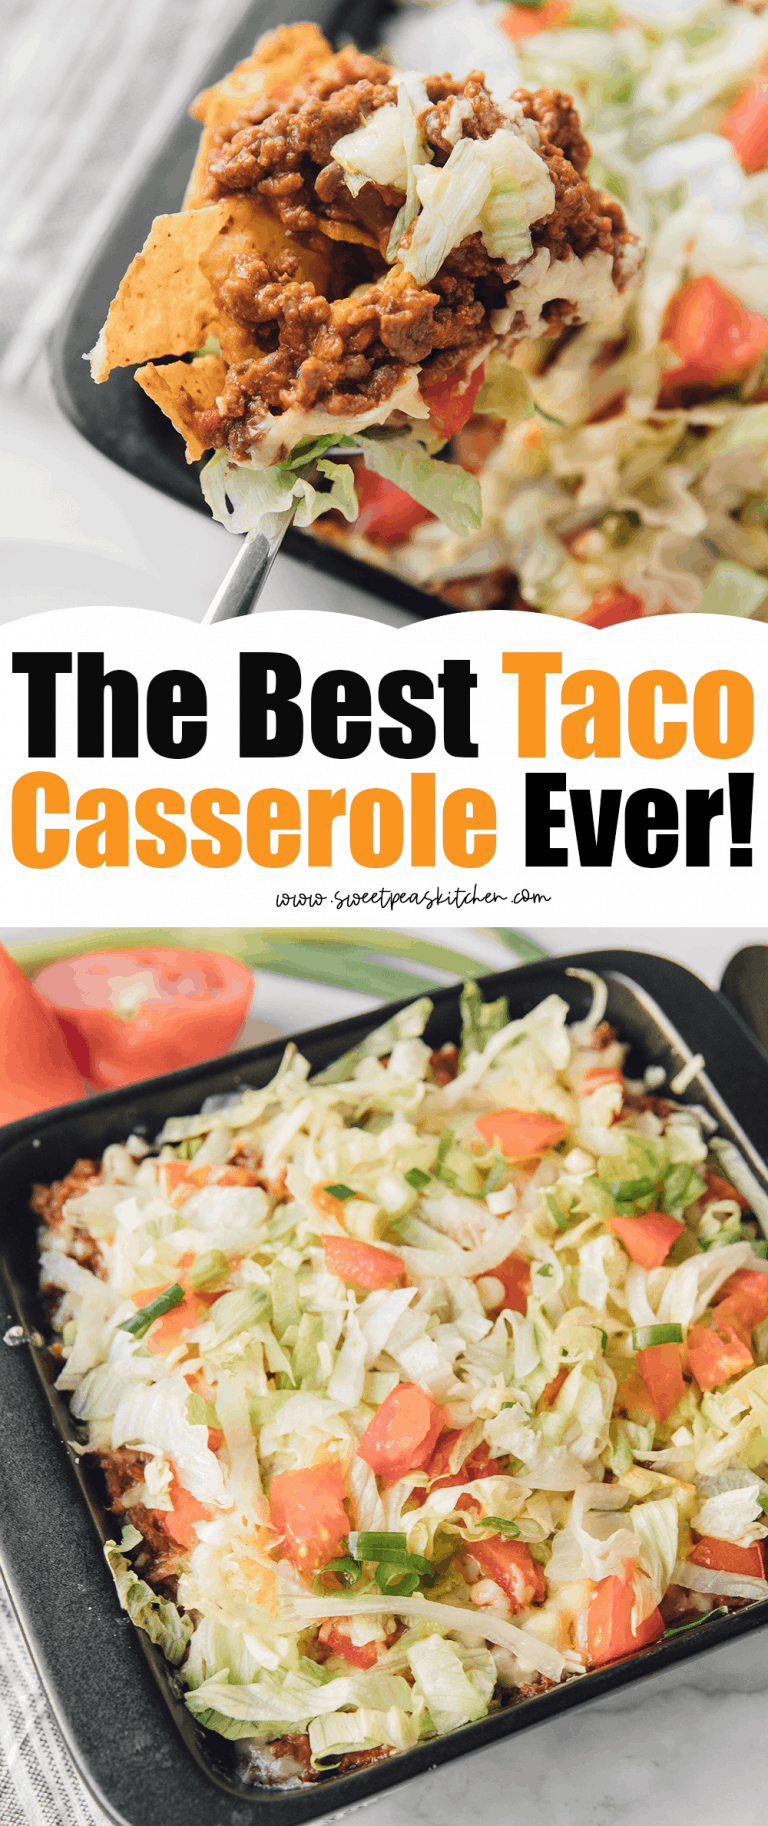 The Best Taco Casserole Ever - Sweet Pea's Kitchen